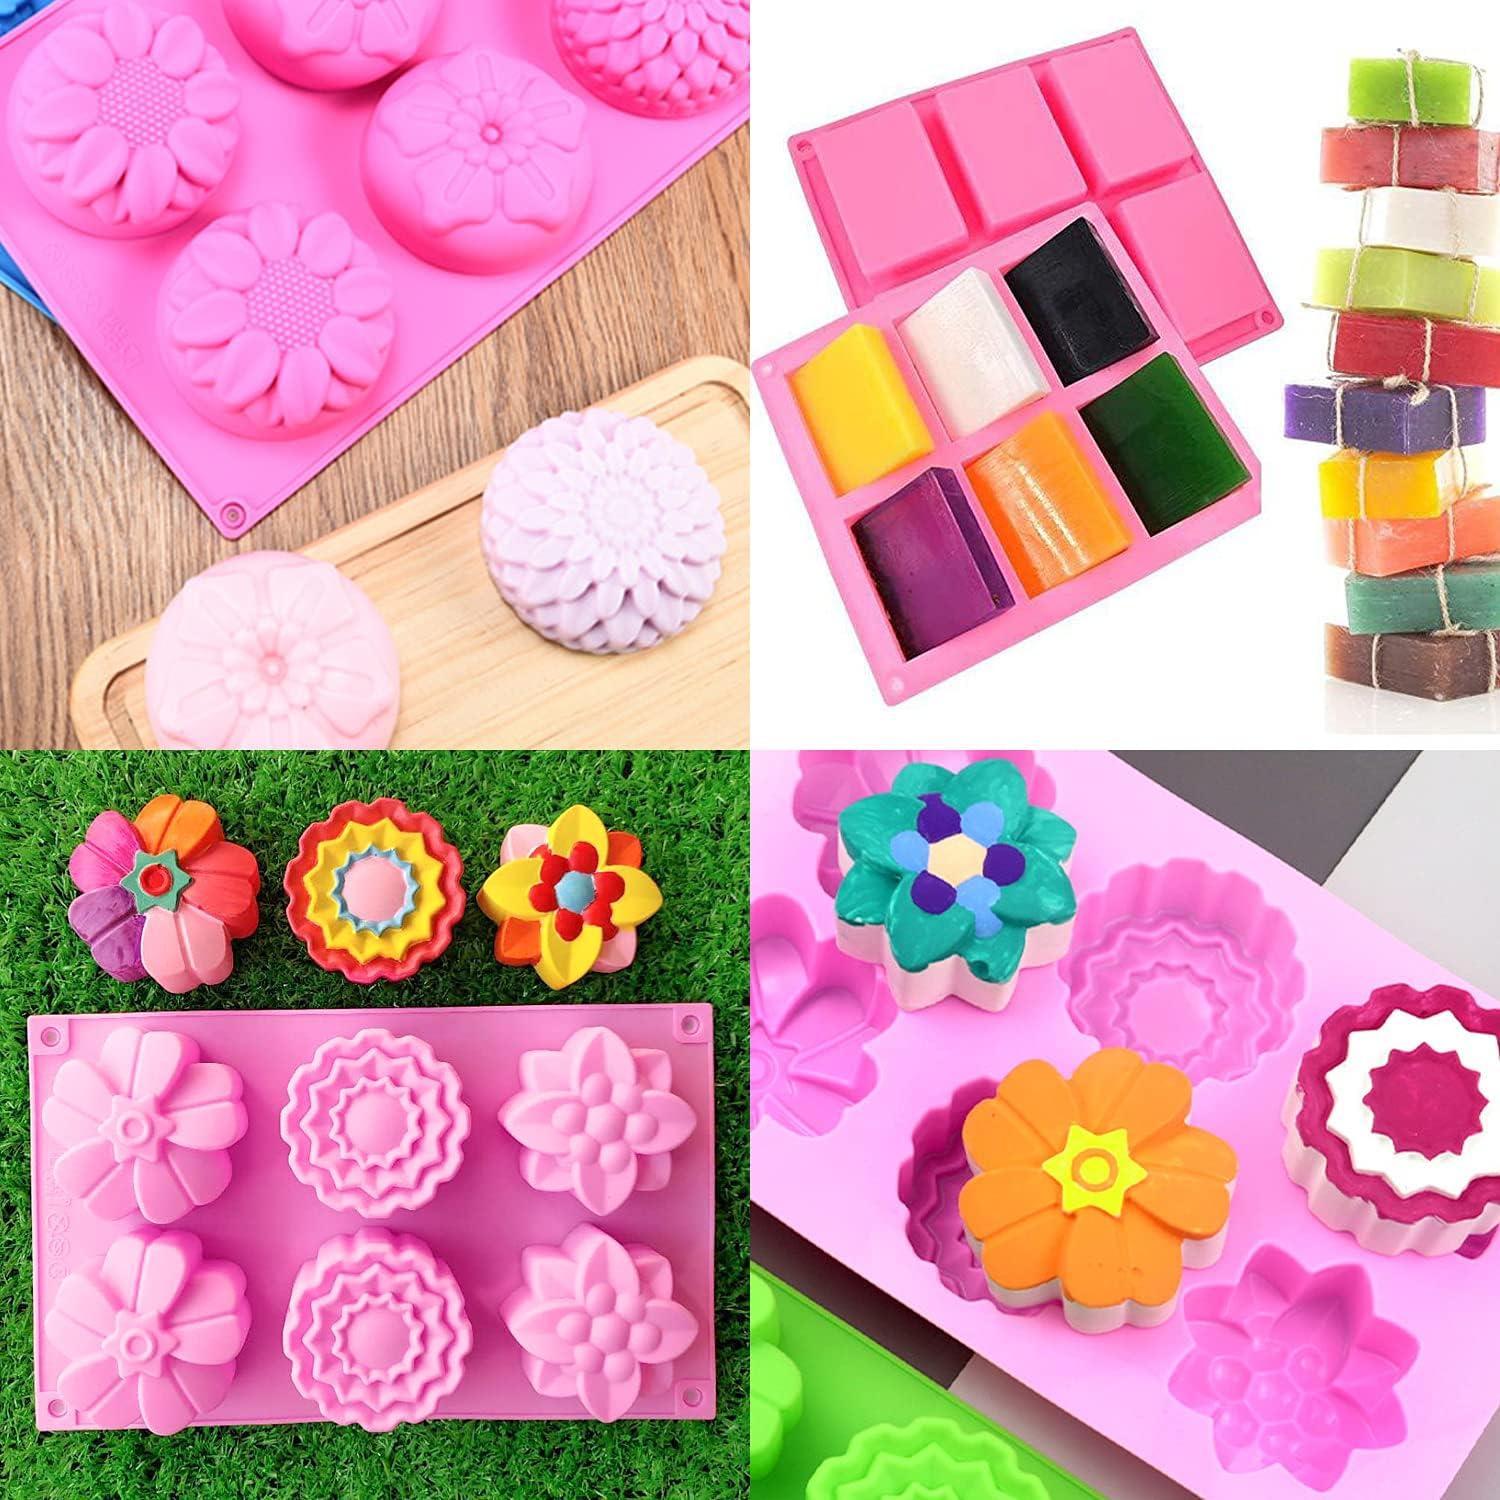 Echodo 6 Cavity Silicone Flower Soap Mold Chrysanthemum Sunflower Mixed  Flower Shapes Cupcake Backing Mold for Homemade Soap, Cake, Cupcake, Bread